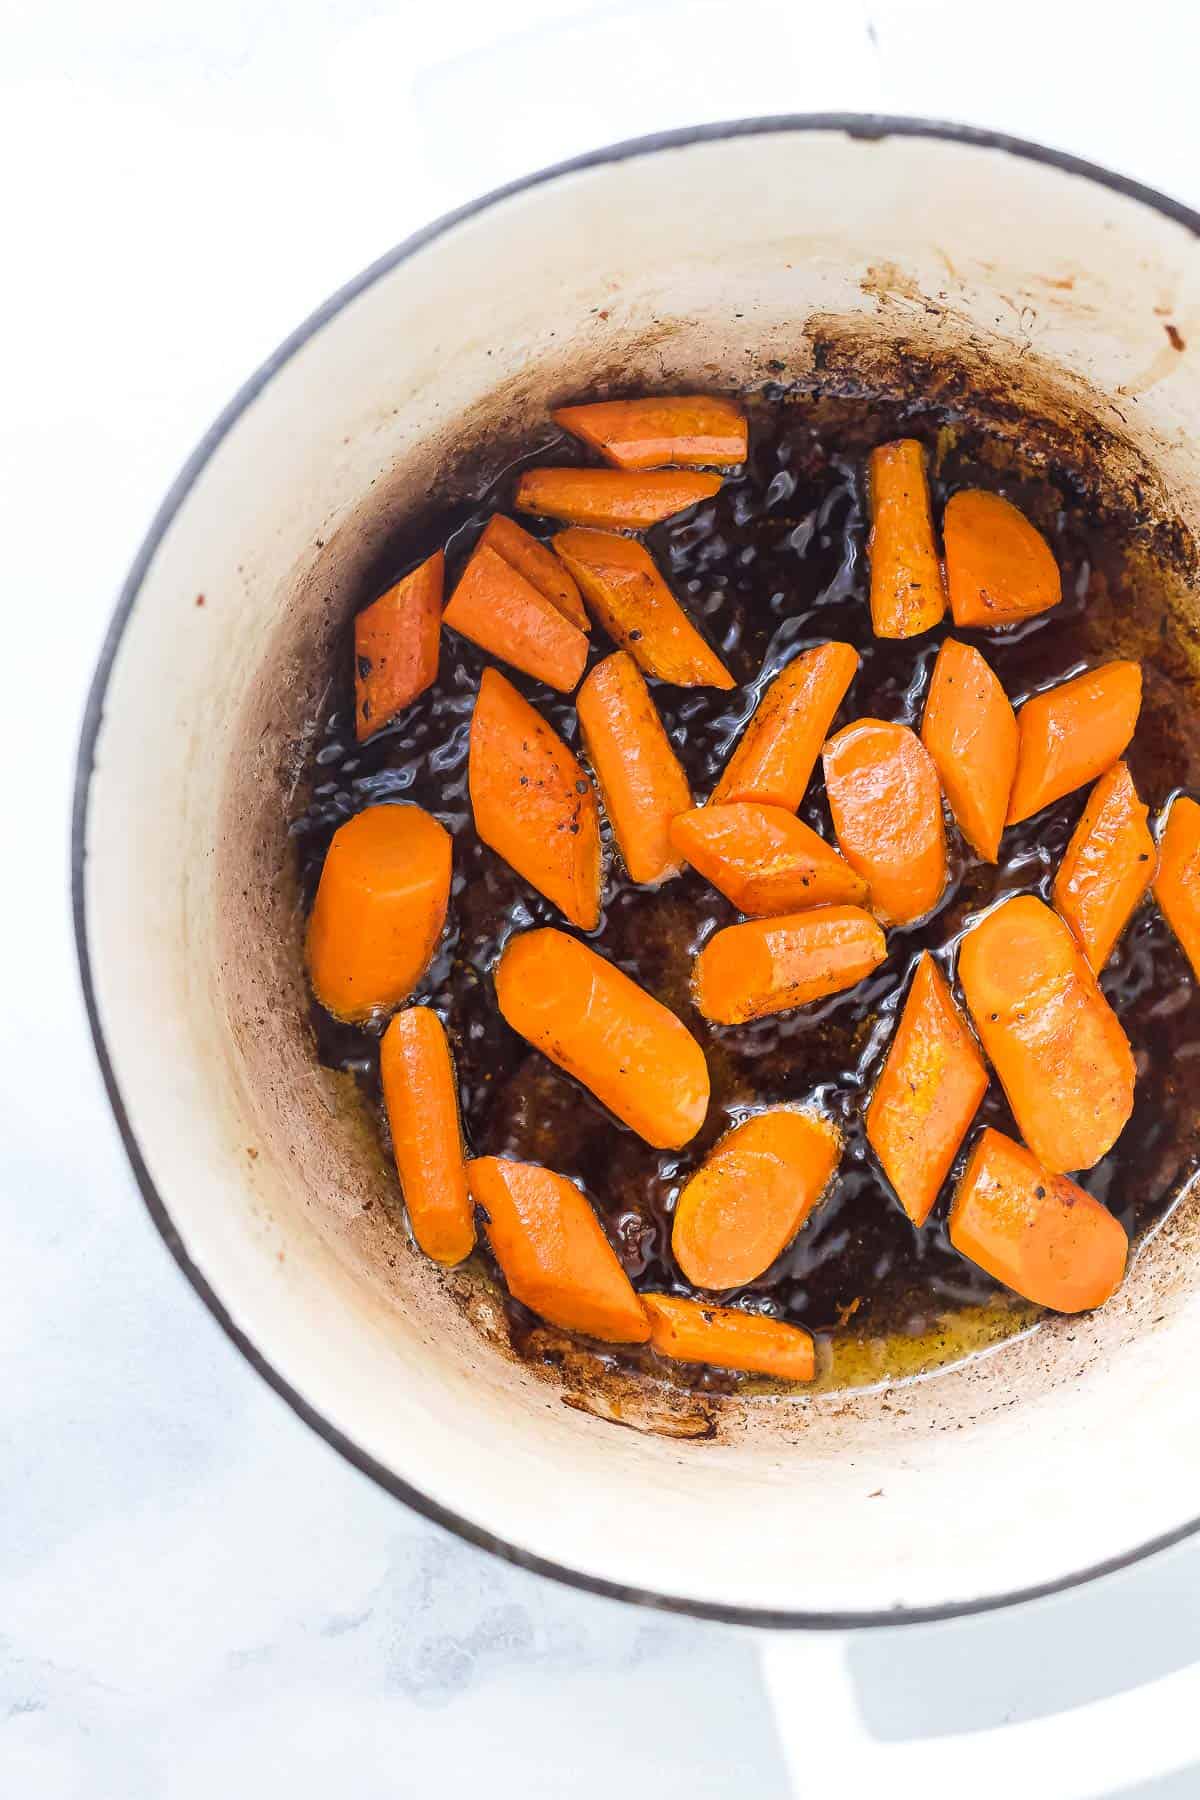 Carrots sautéing in a white dutch oven with a blue rim